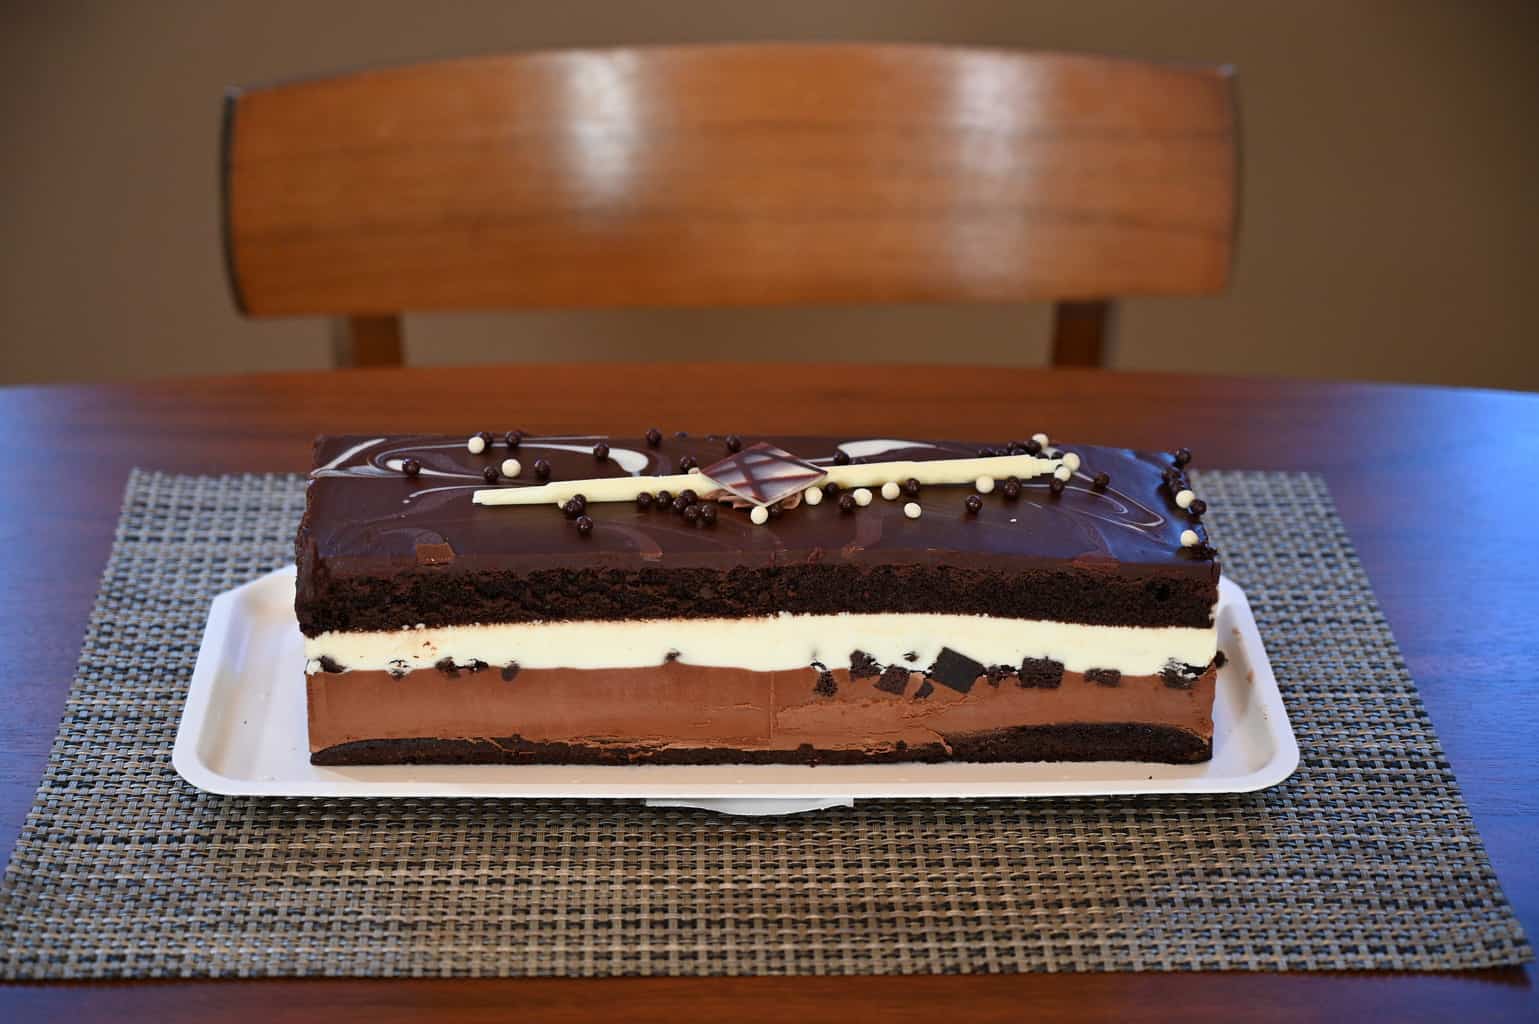 The Kirkland Signature Tuxedo Cake shown with the lid off.